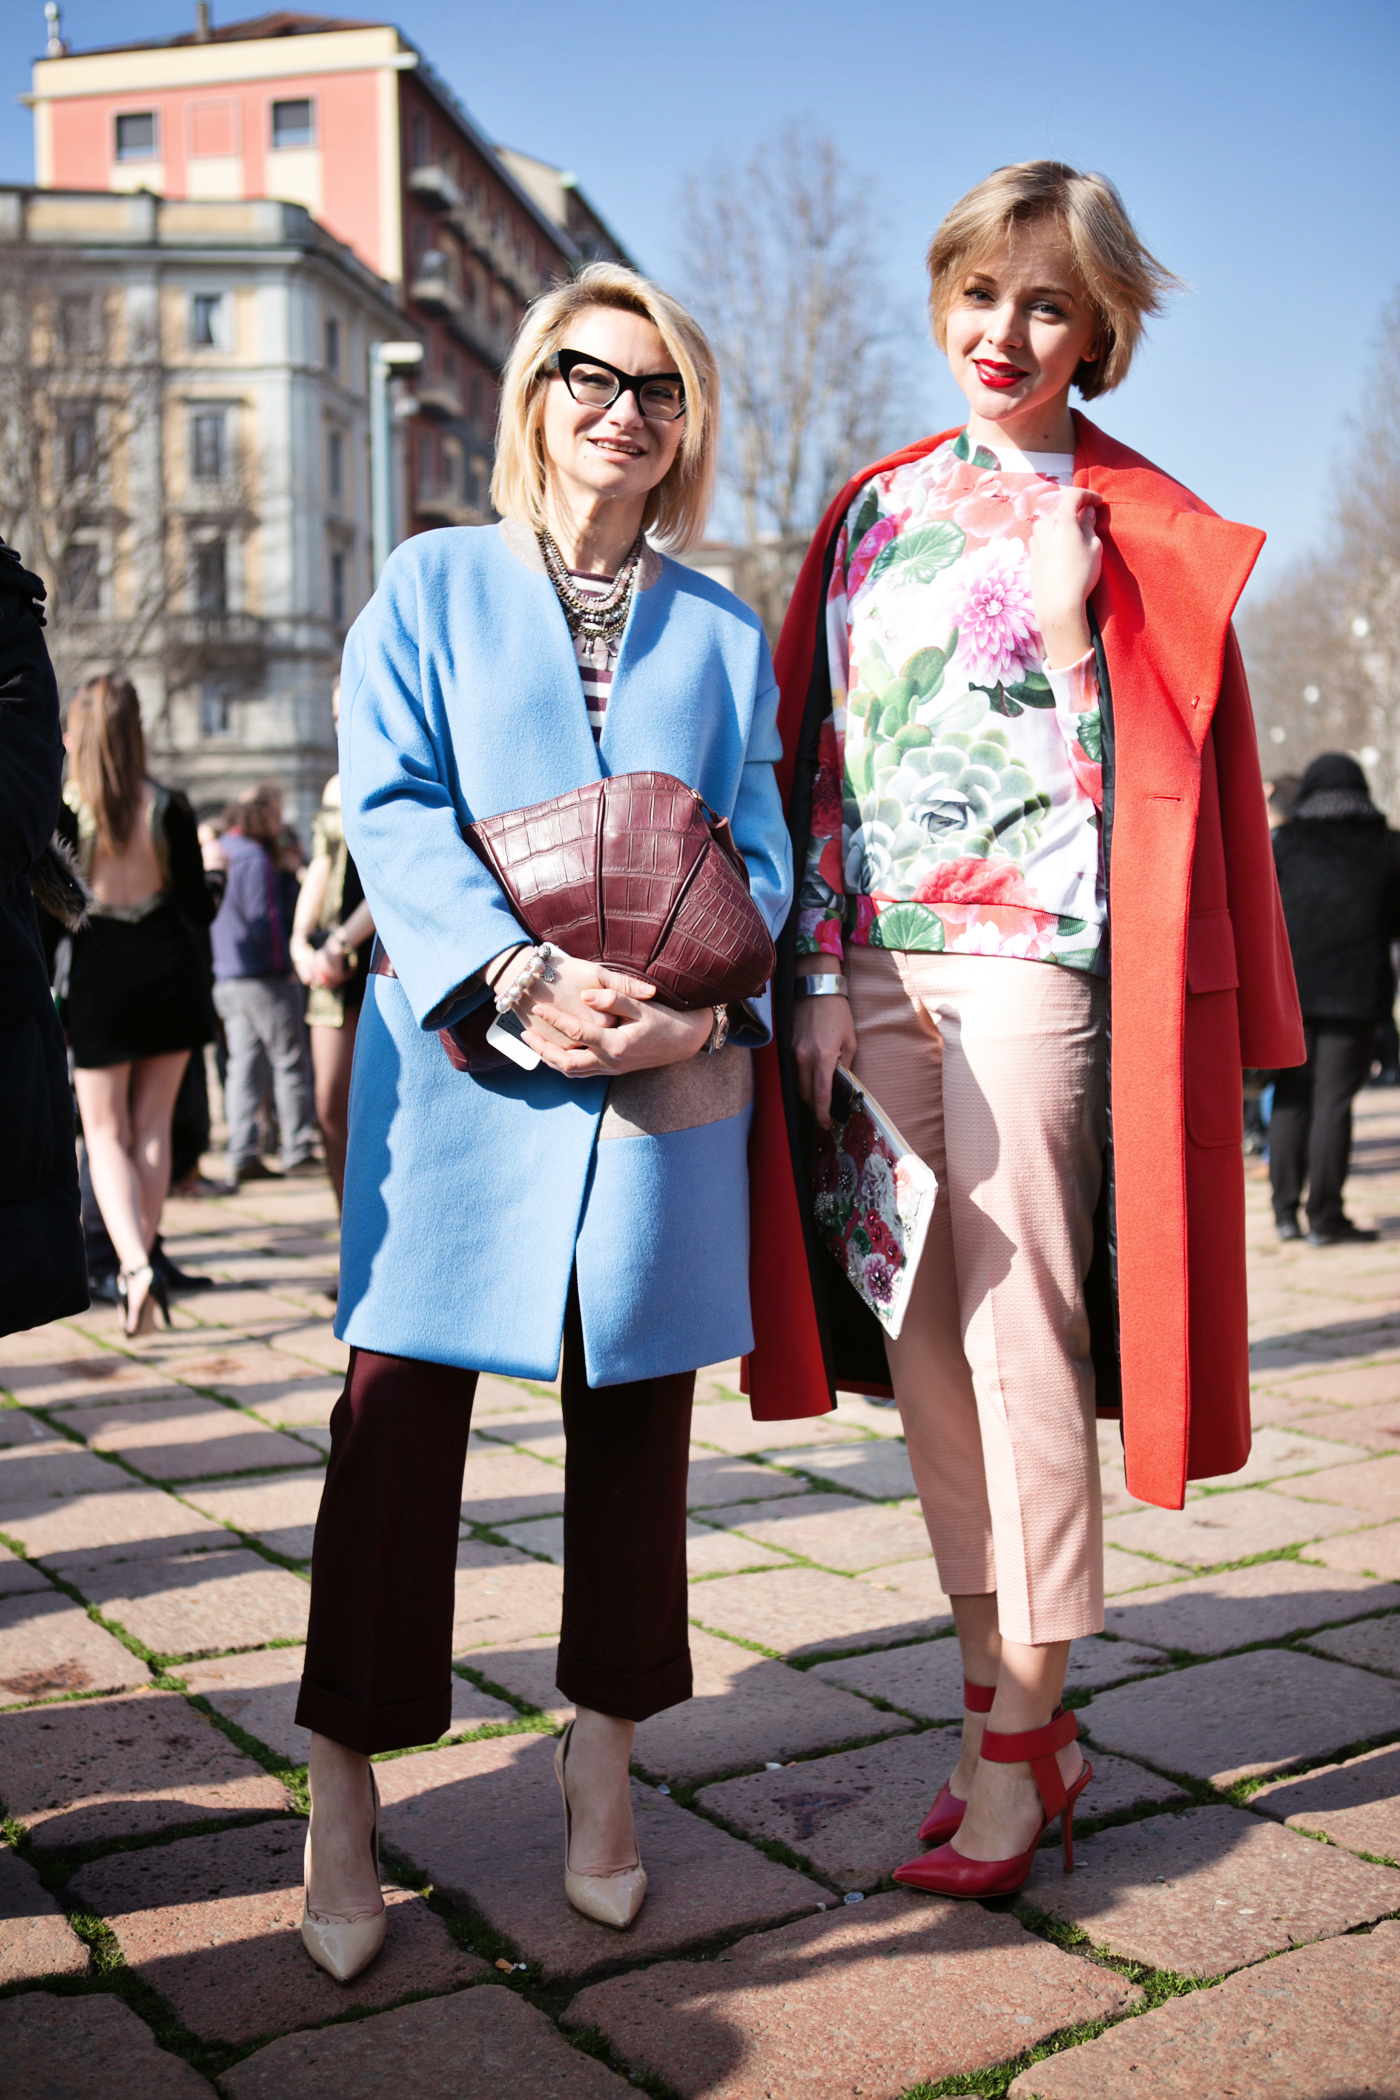 thecablook darya kamalova russian italian fashion blogger blonde short hair pixie cut street style whats inside you by eleonora carisi outfit asos long red coat steven heels shopbop milan fashion week aw14 15 arco della pace just cavalli-17 copy